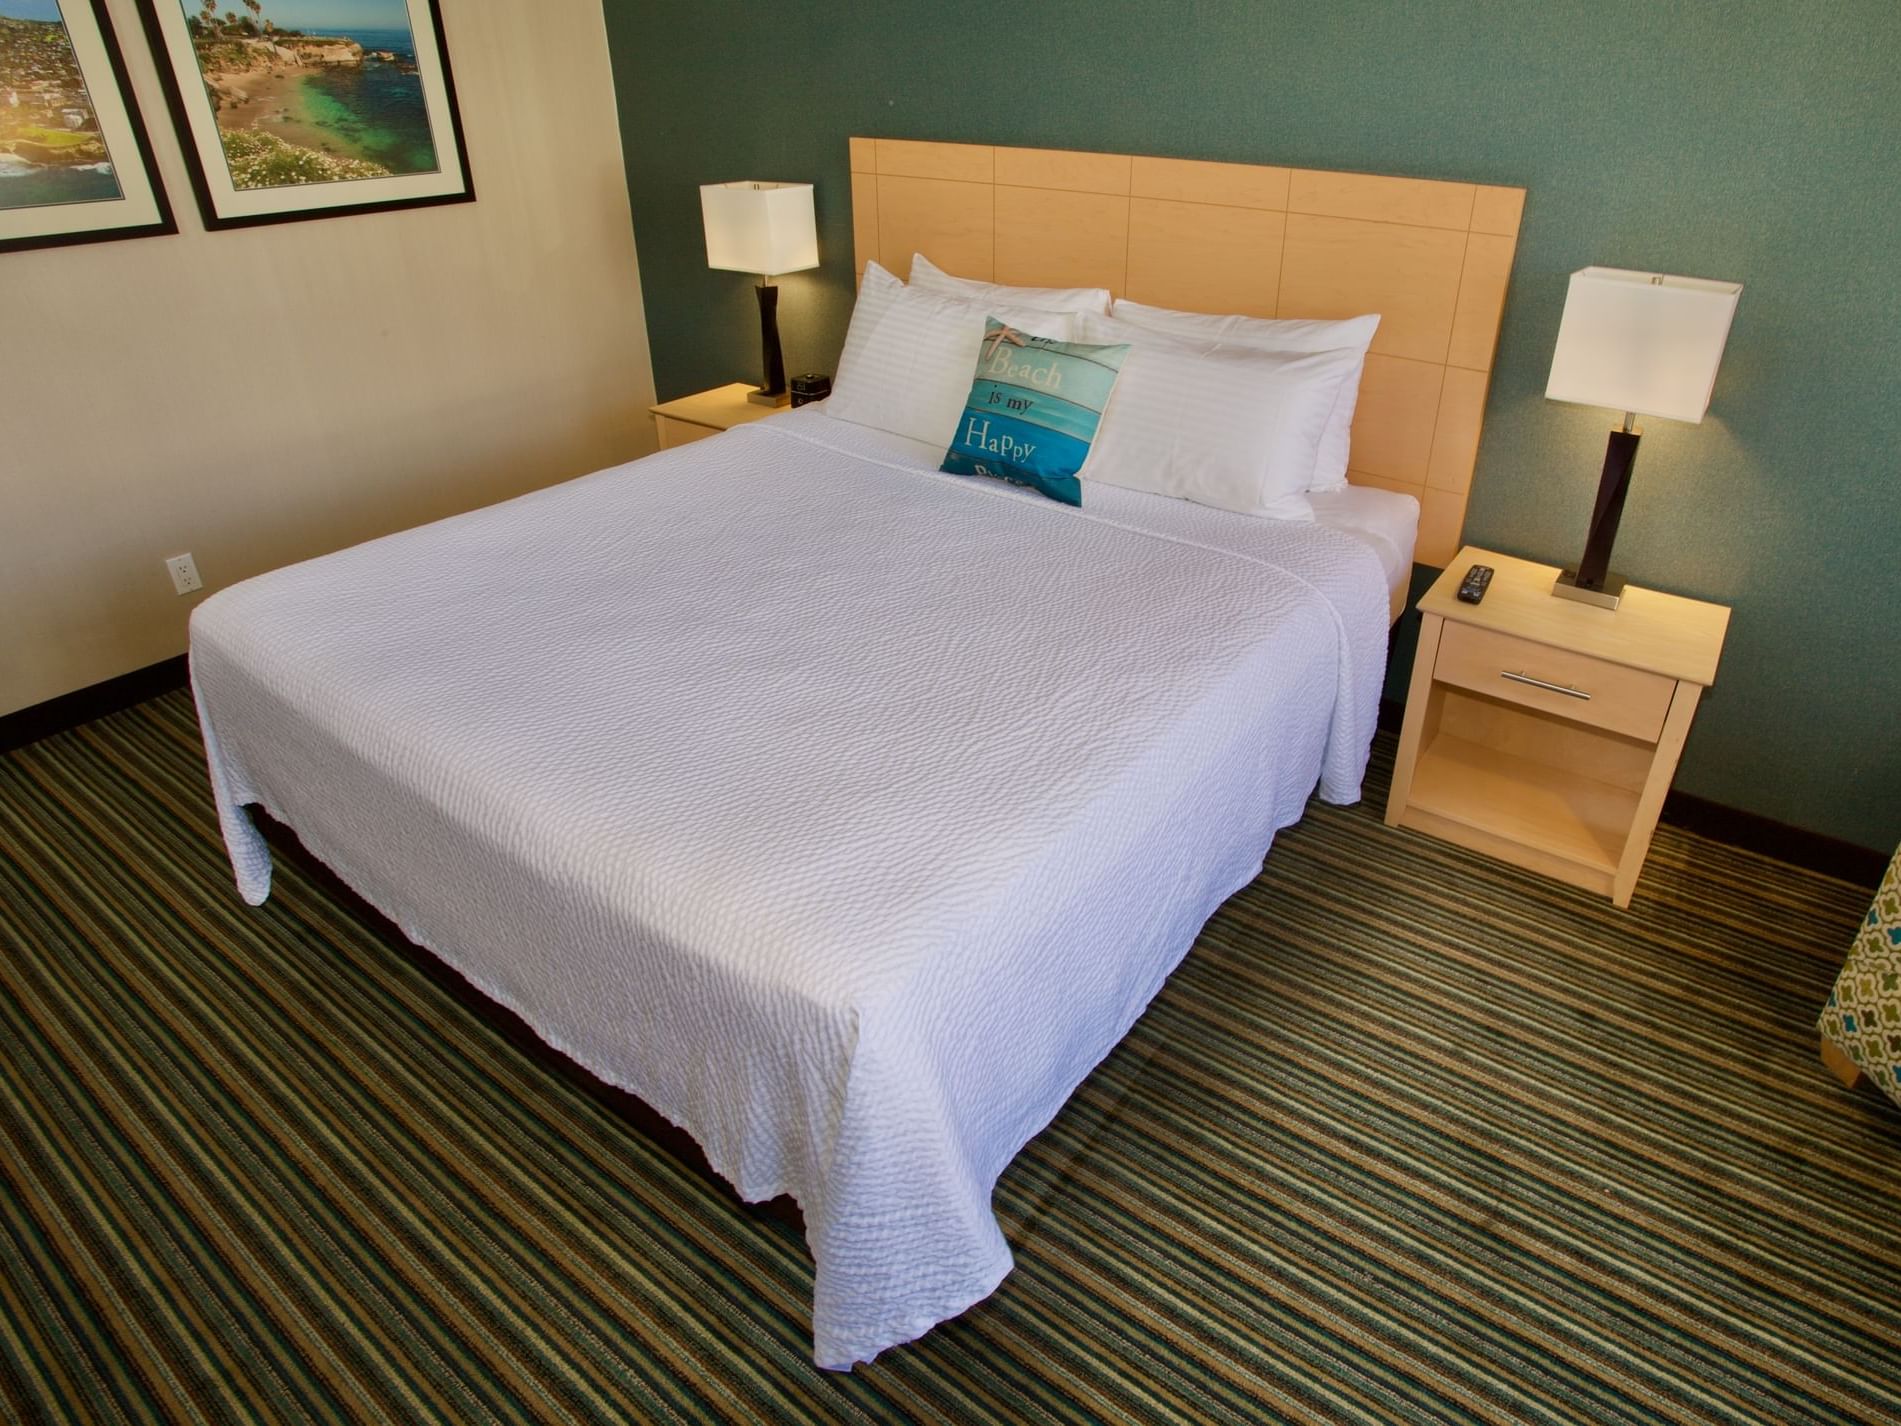 King Room with a double bed at Inn by the Sea at La Jolla